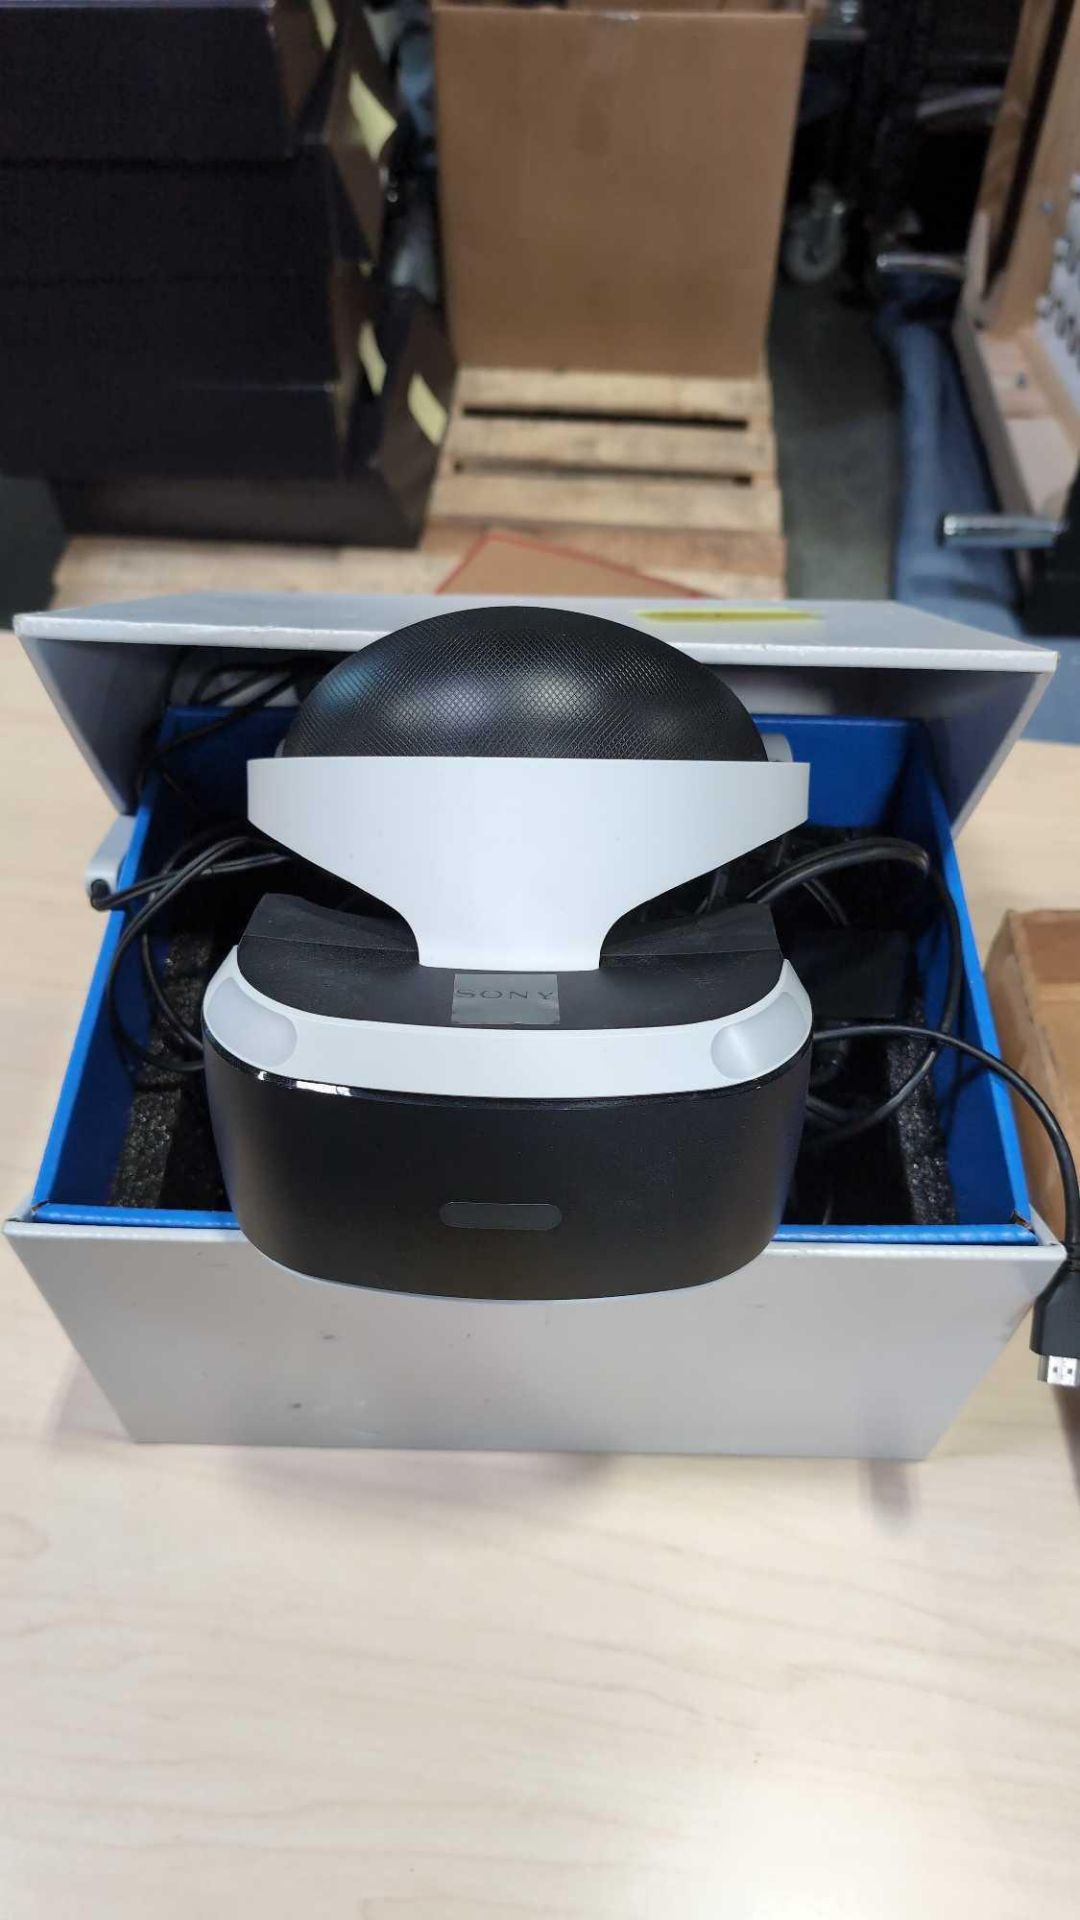 PlayStation VR headset - Image 2 of 6